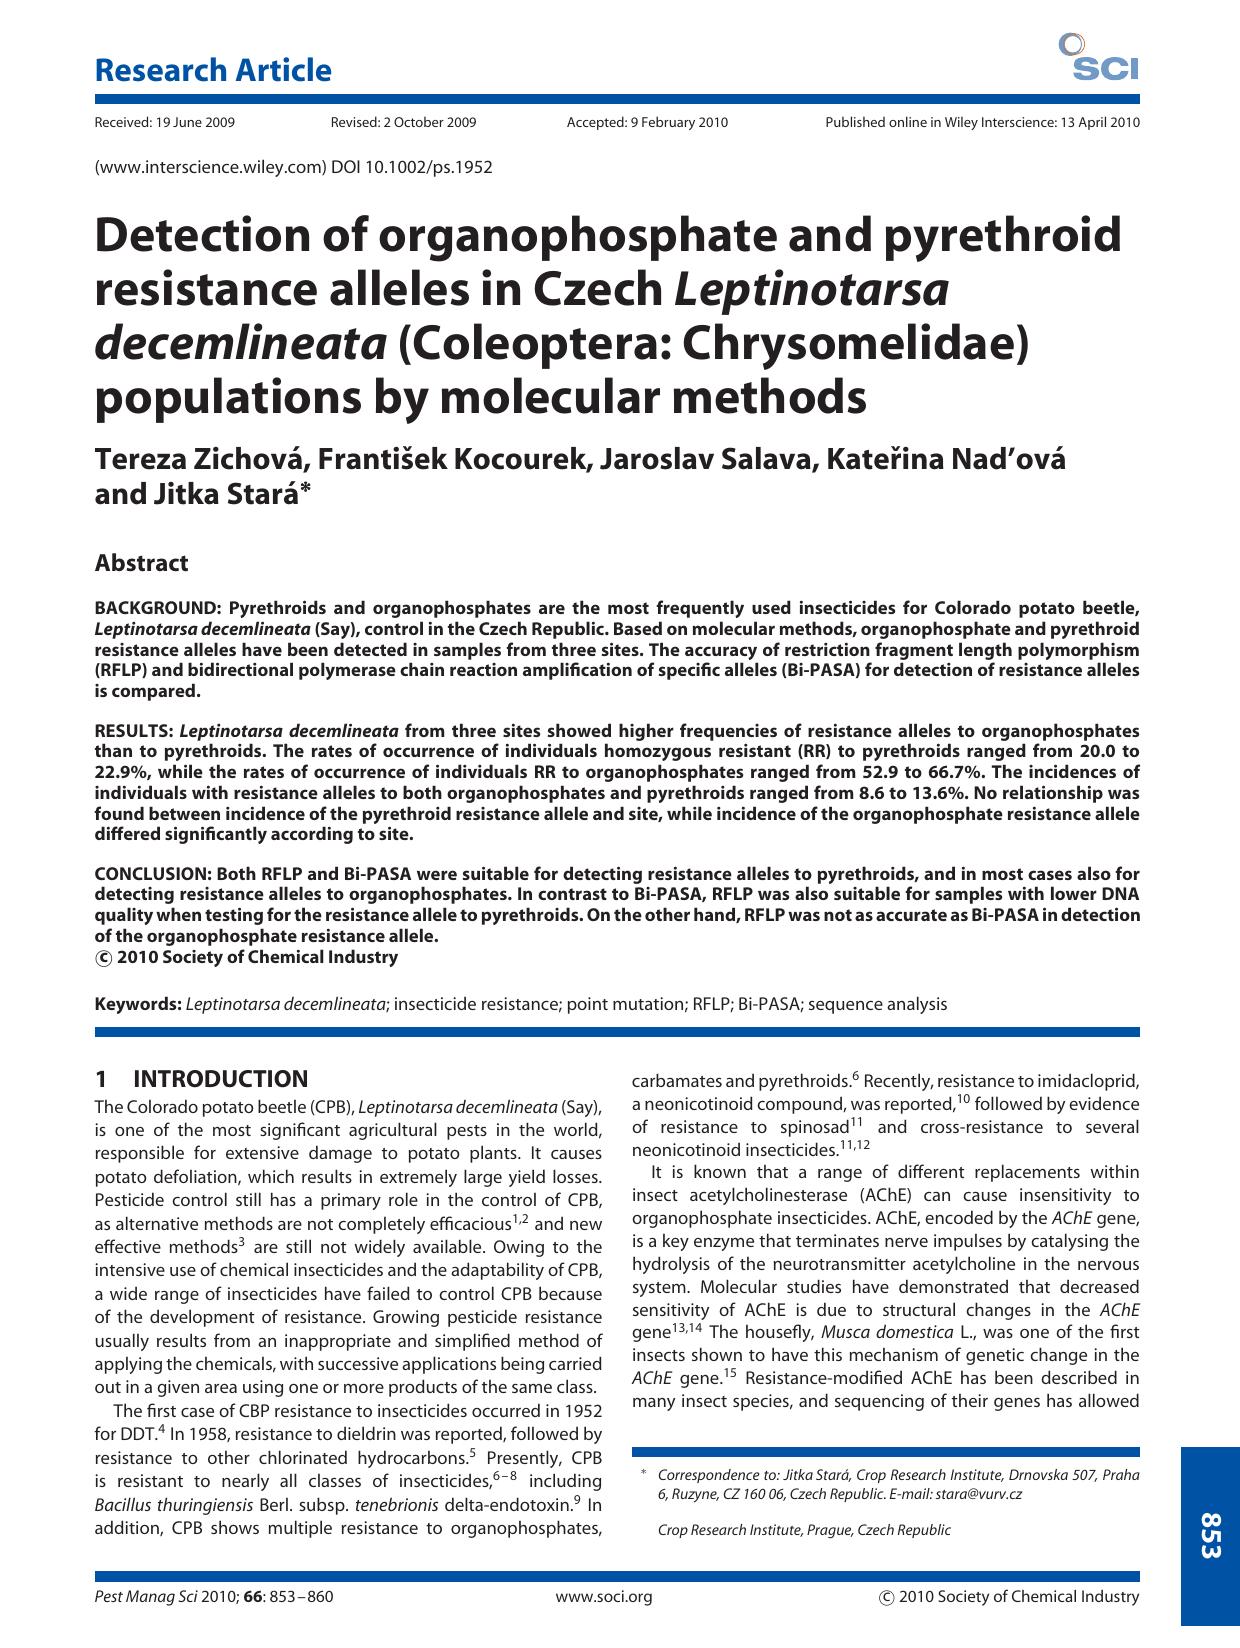 Detection of organophosphate and pyrethroid resistance alleles in Czech Leptinotarsa decemlineata (Coleoptera: Chrysomelidae) populations by molecular methods by Unknown